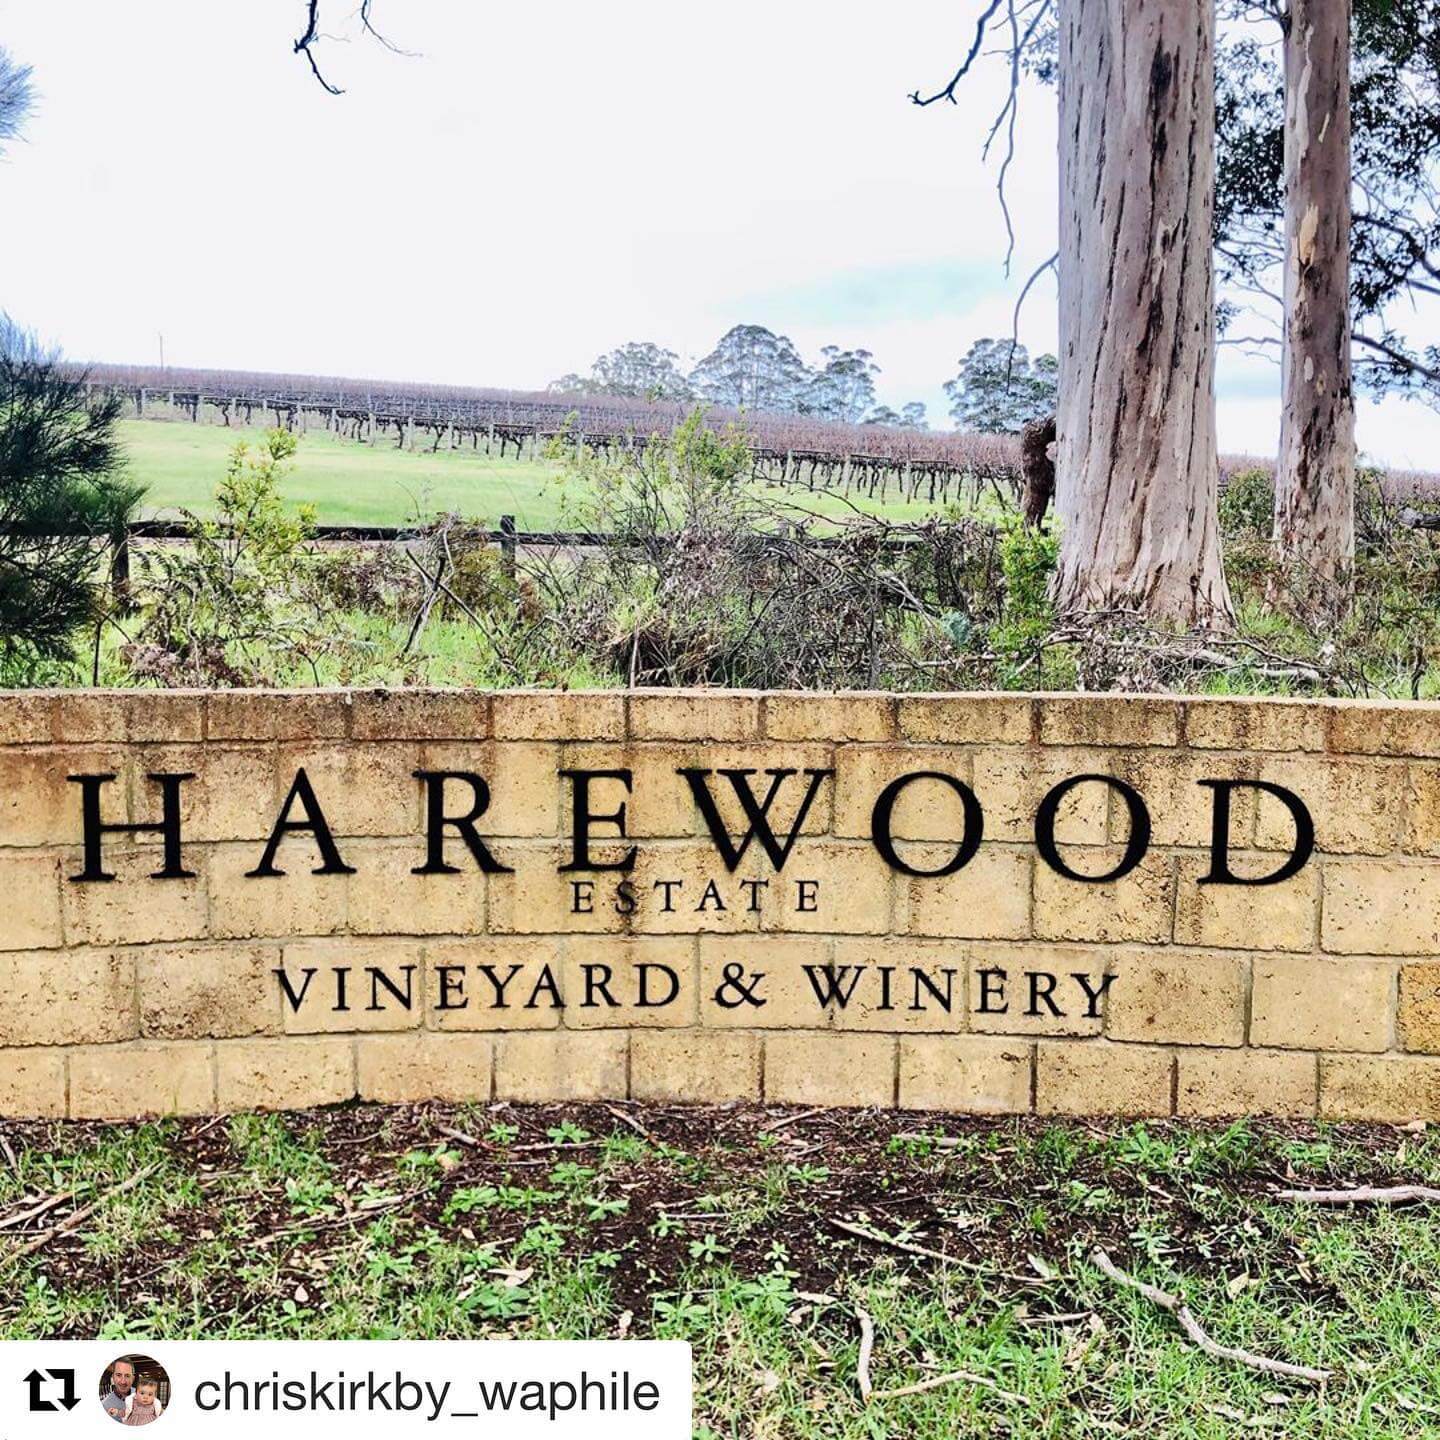 Harewood Estate in Denmark, Great Southern WA : 5 Stars from James Halliday